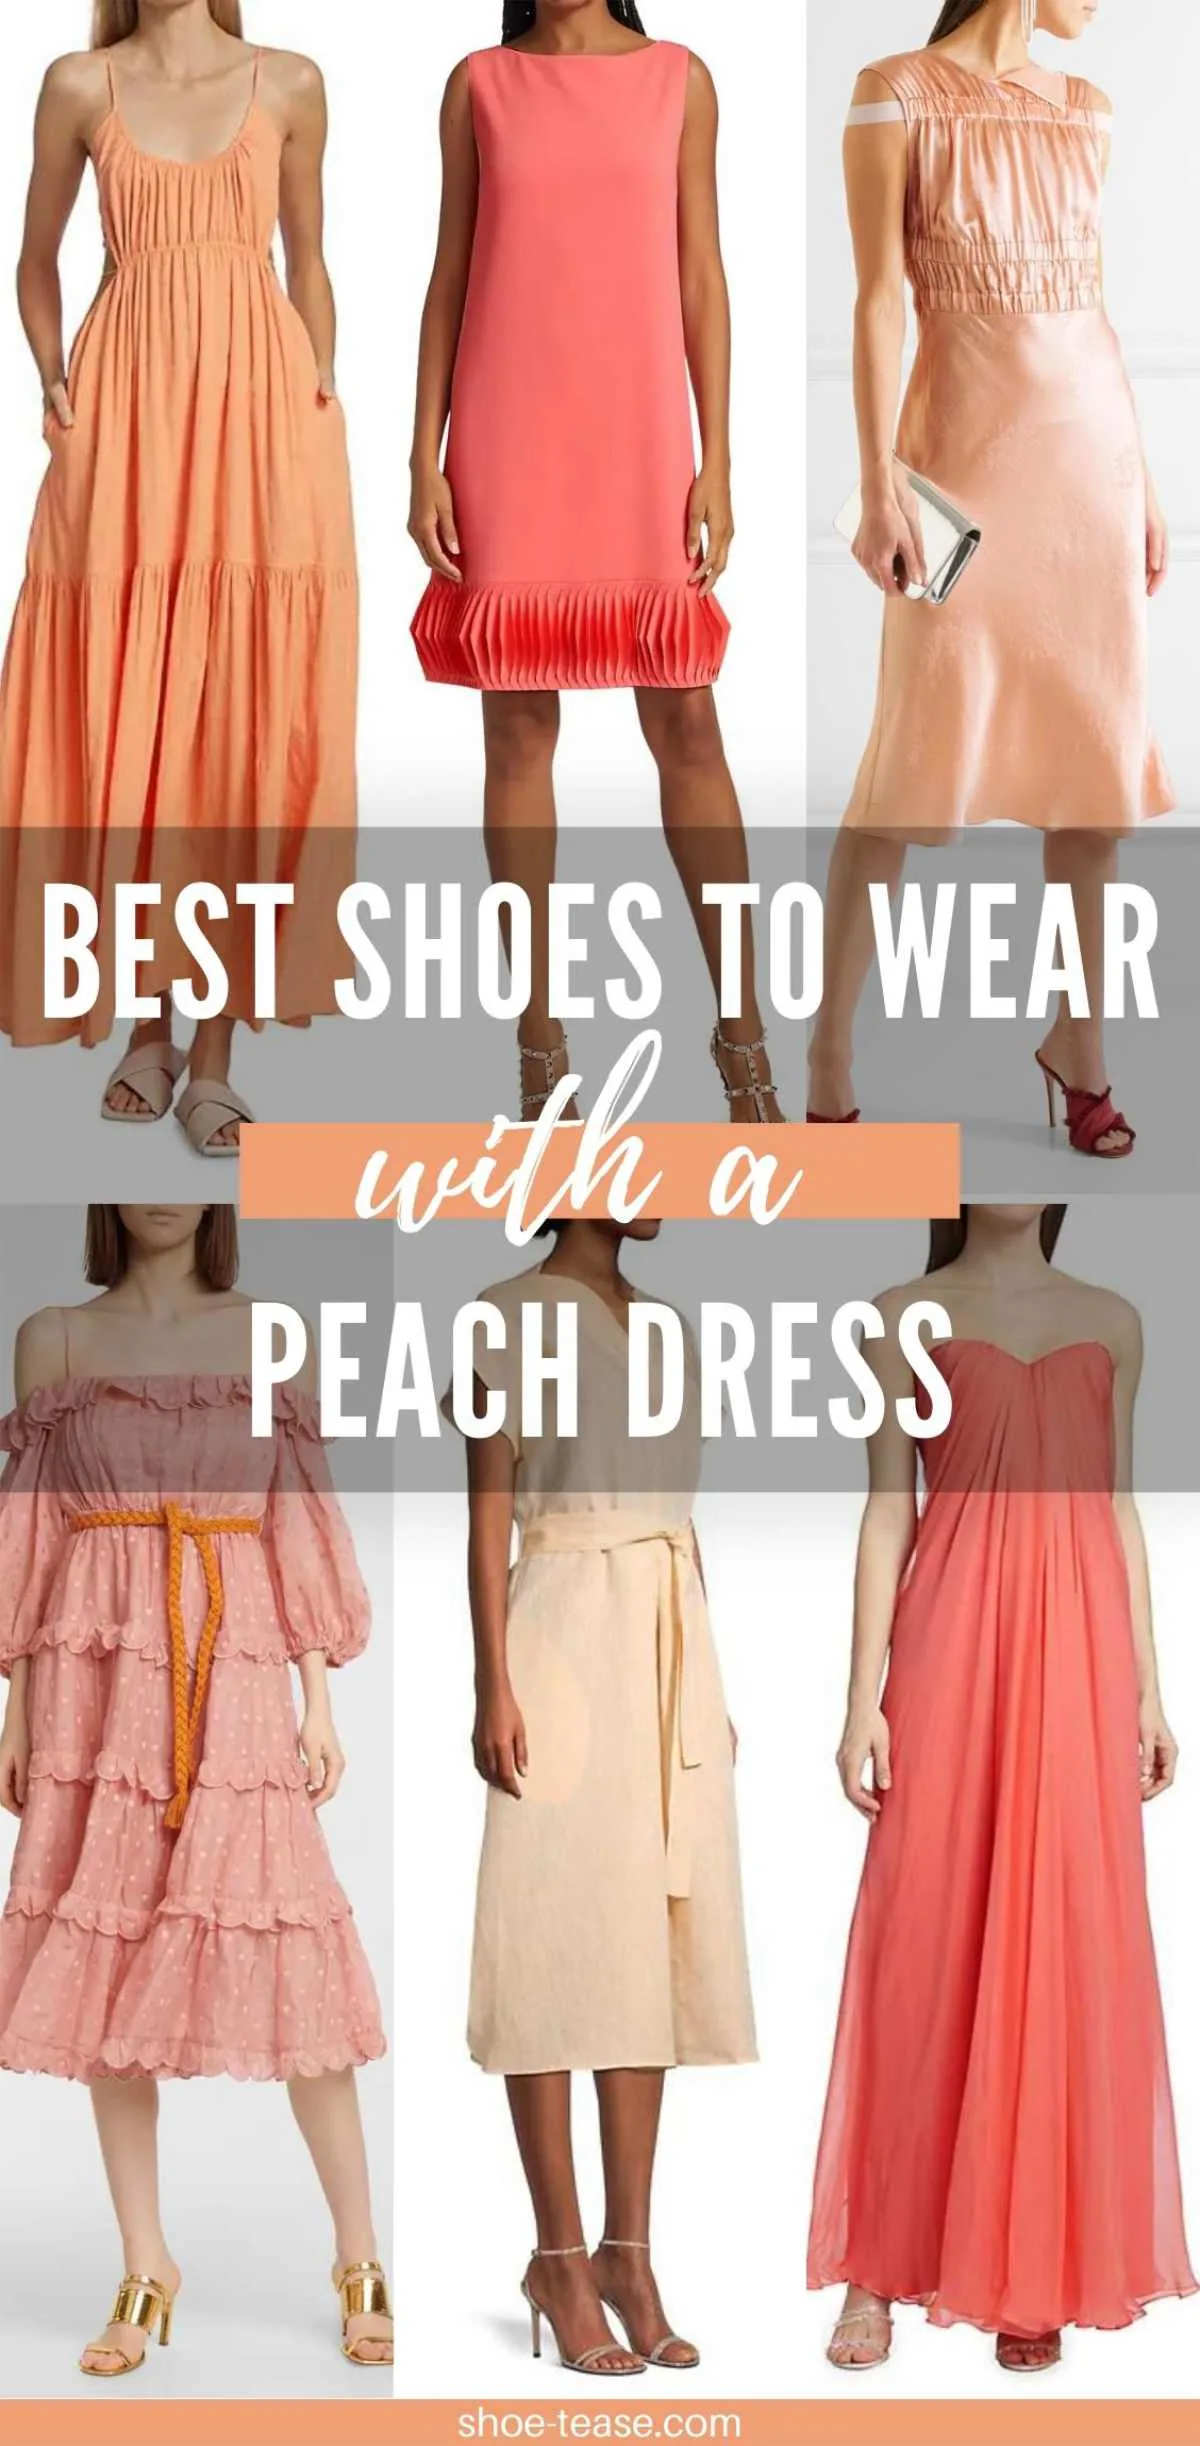 Perfect Couple Dress Combos - Explore Matching Outfits for Every Occasion!  – Archittam Fashion